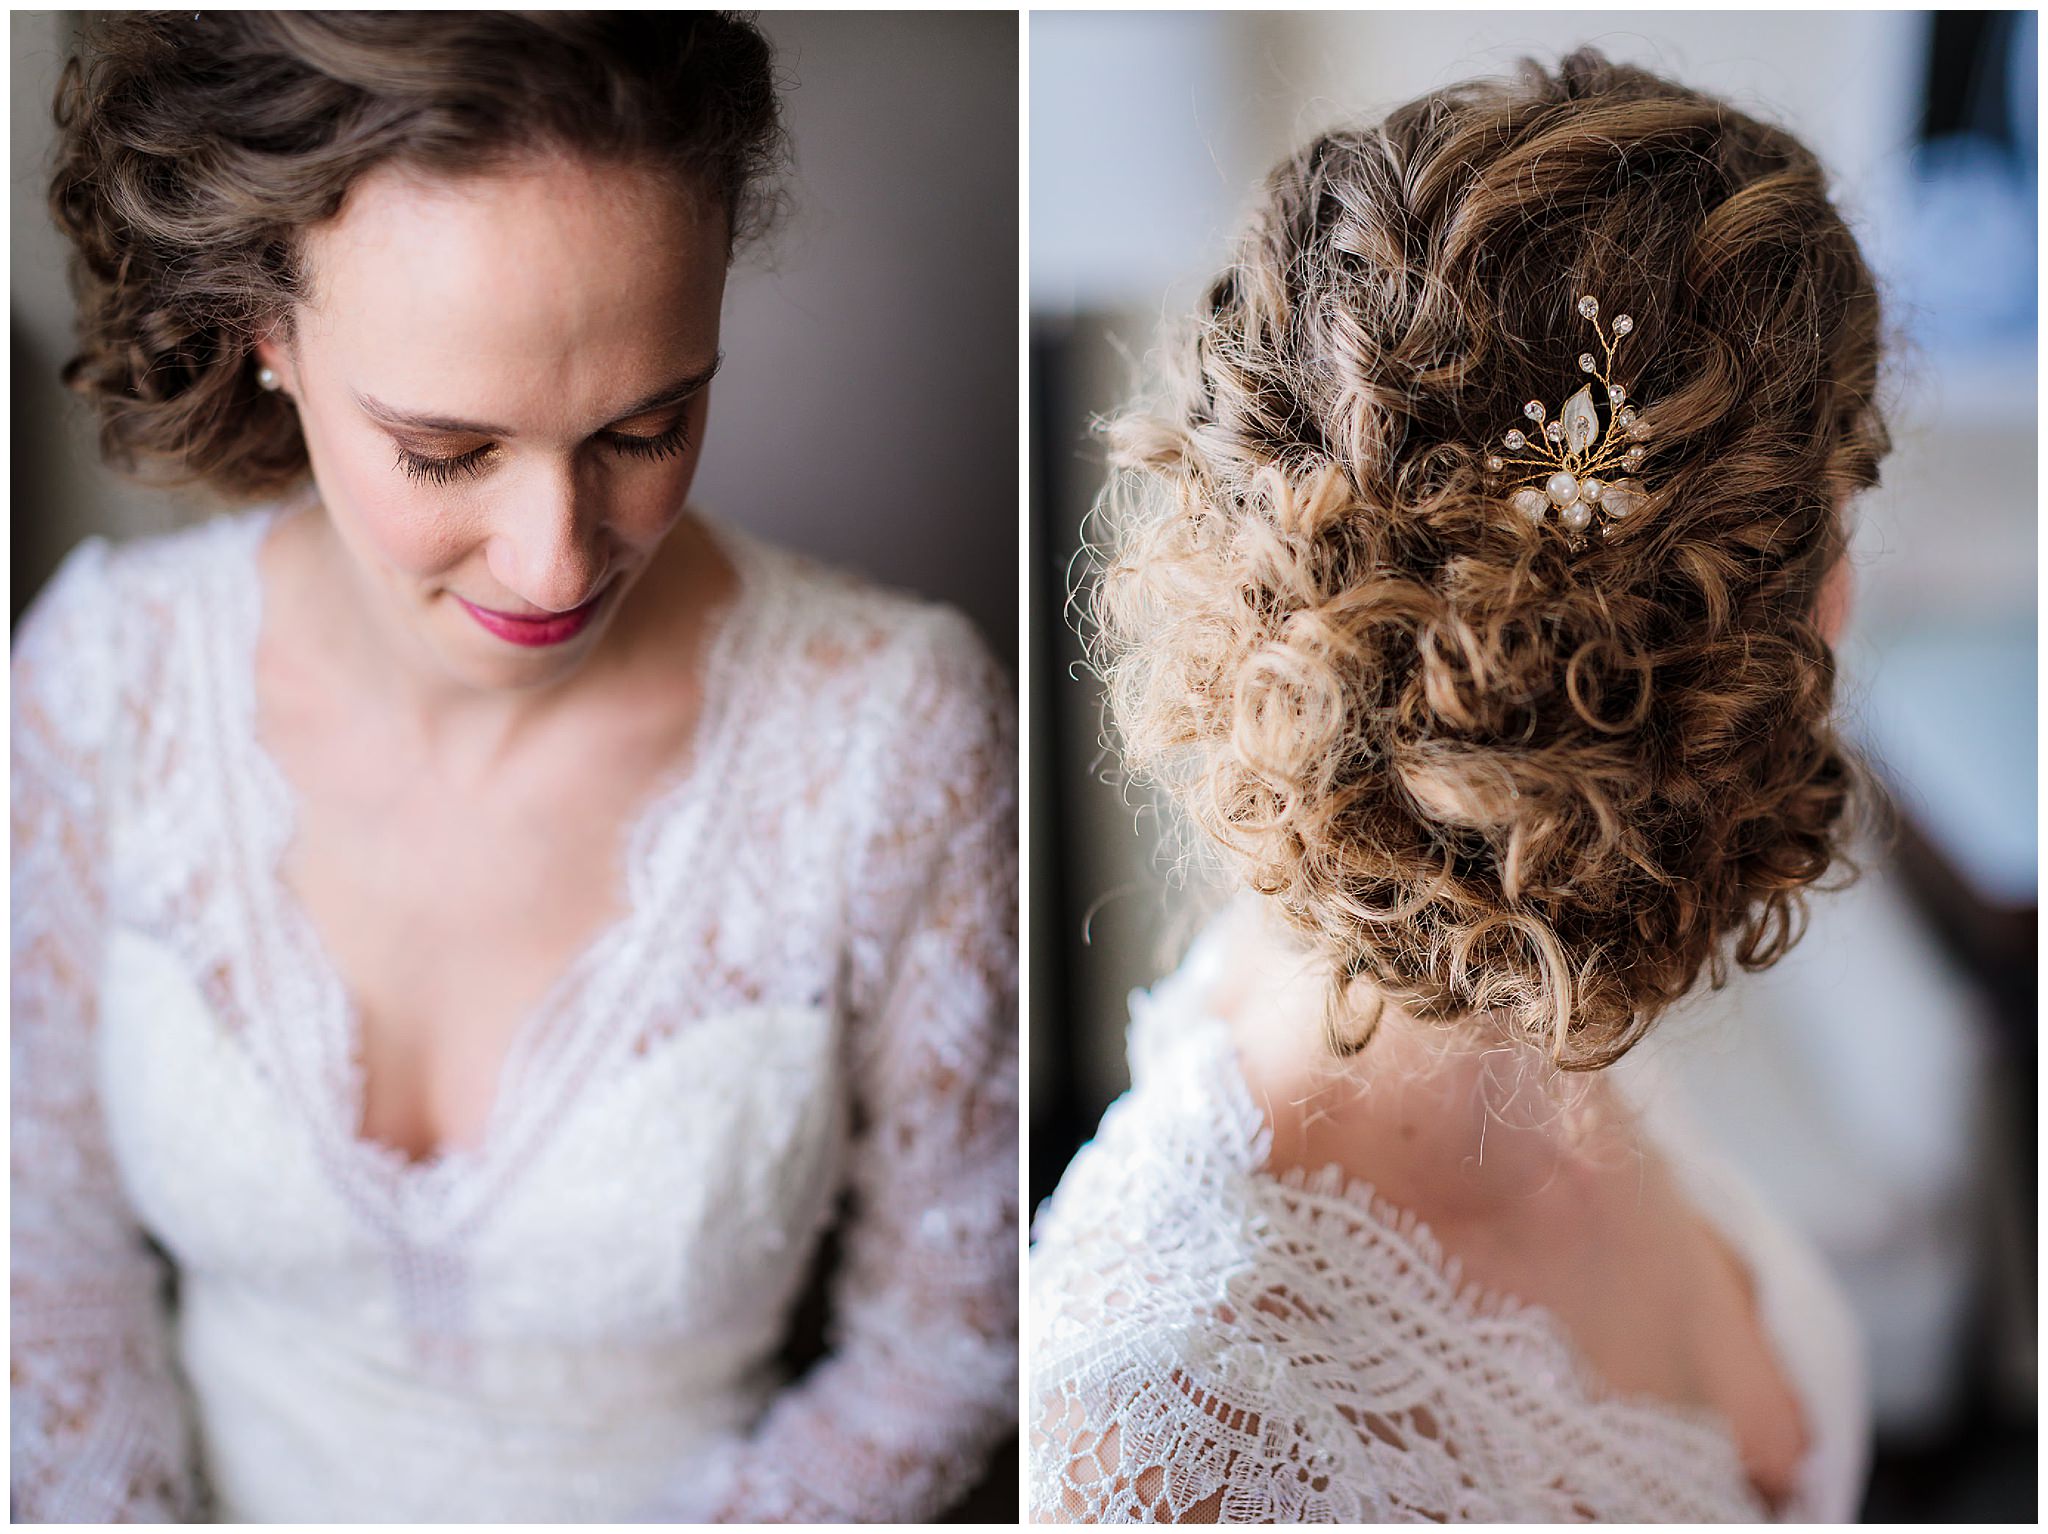 Bridal portrait by window light with hair done by Salon Ivy in Pittsburgh, PA